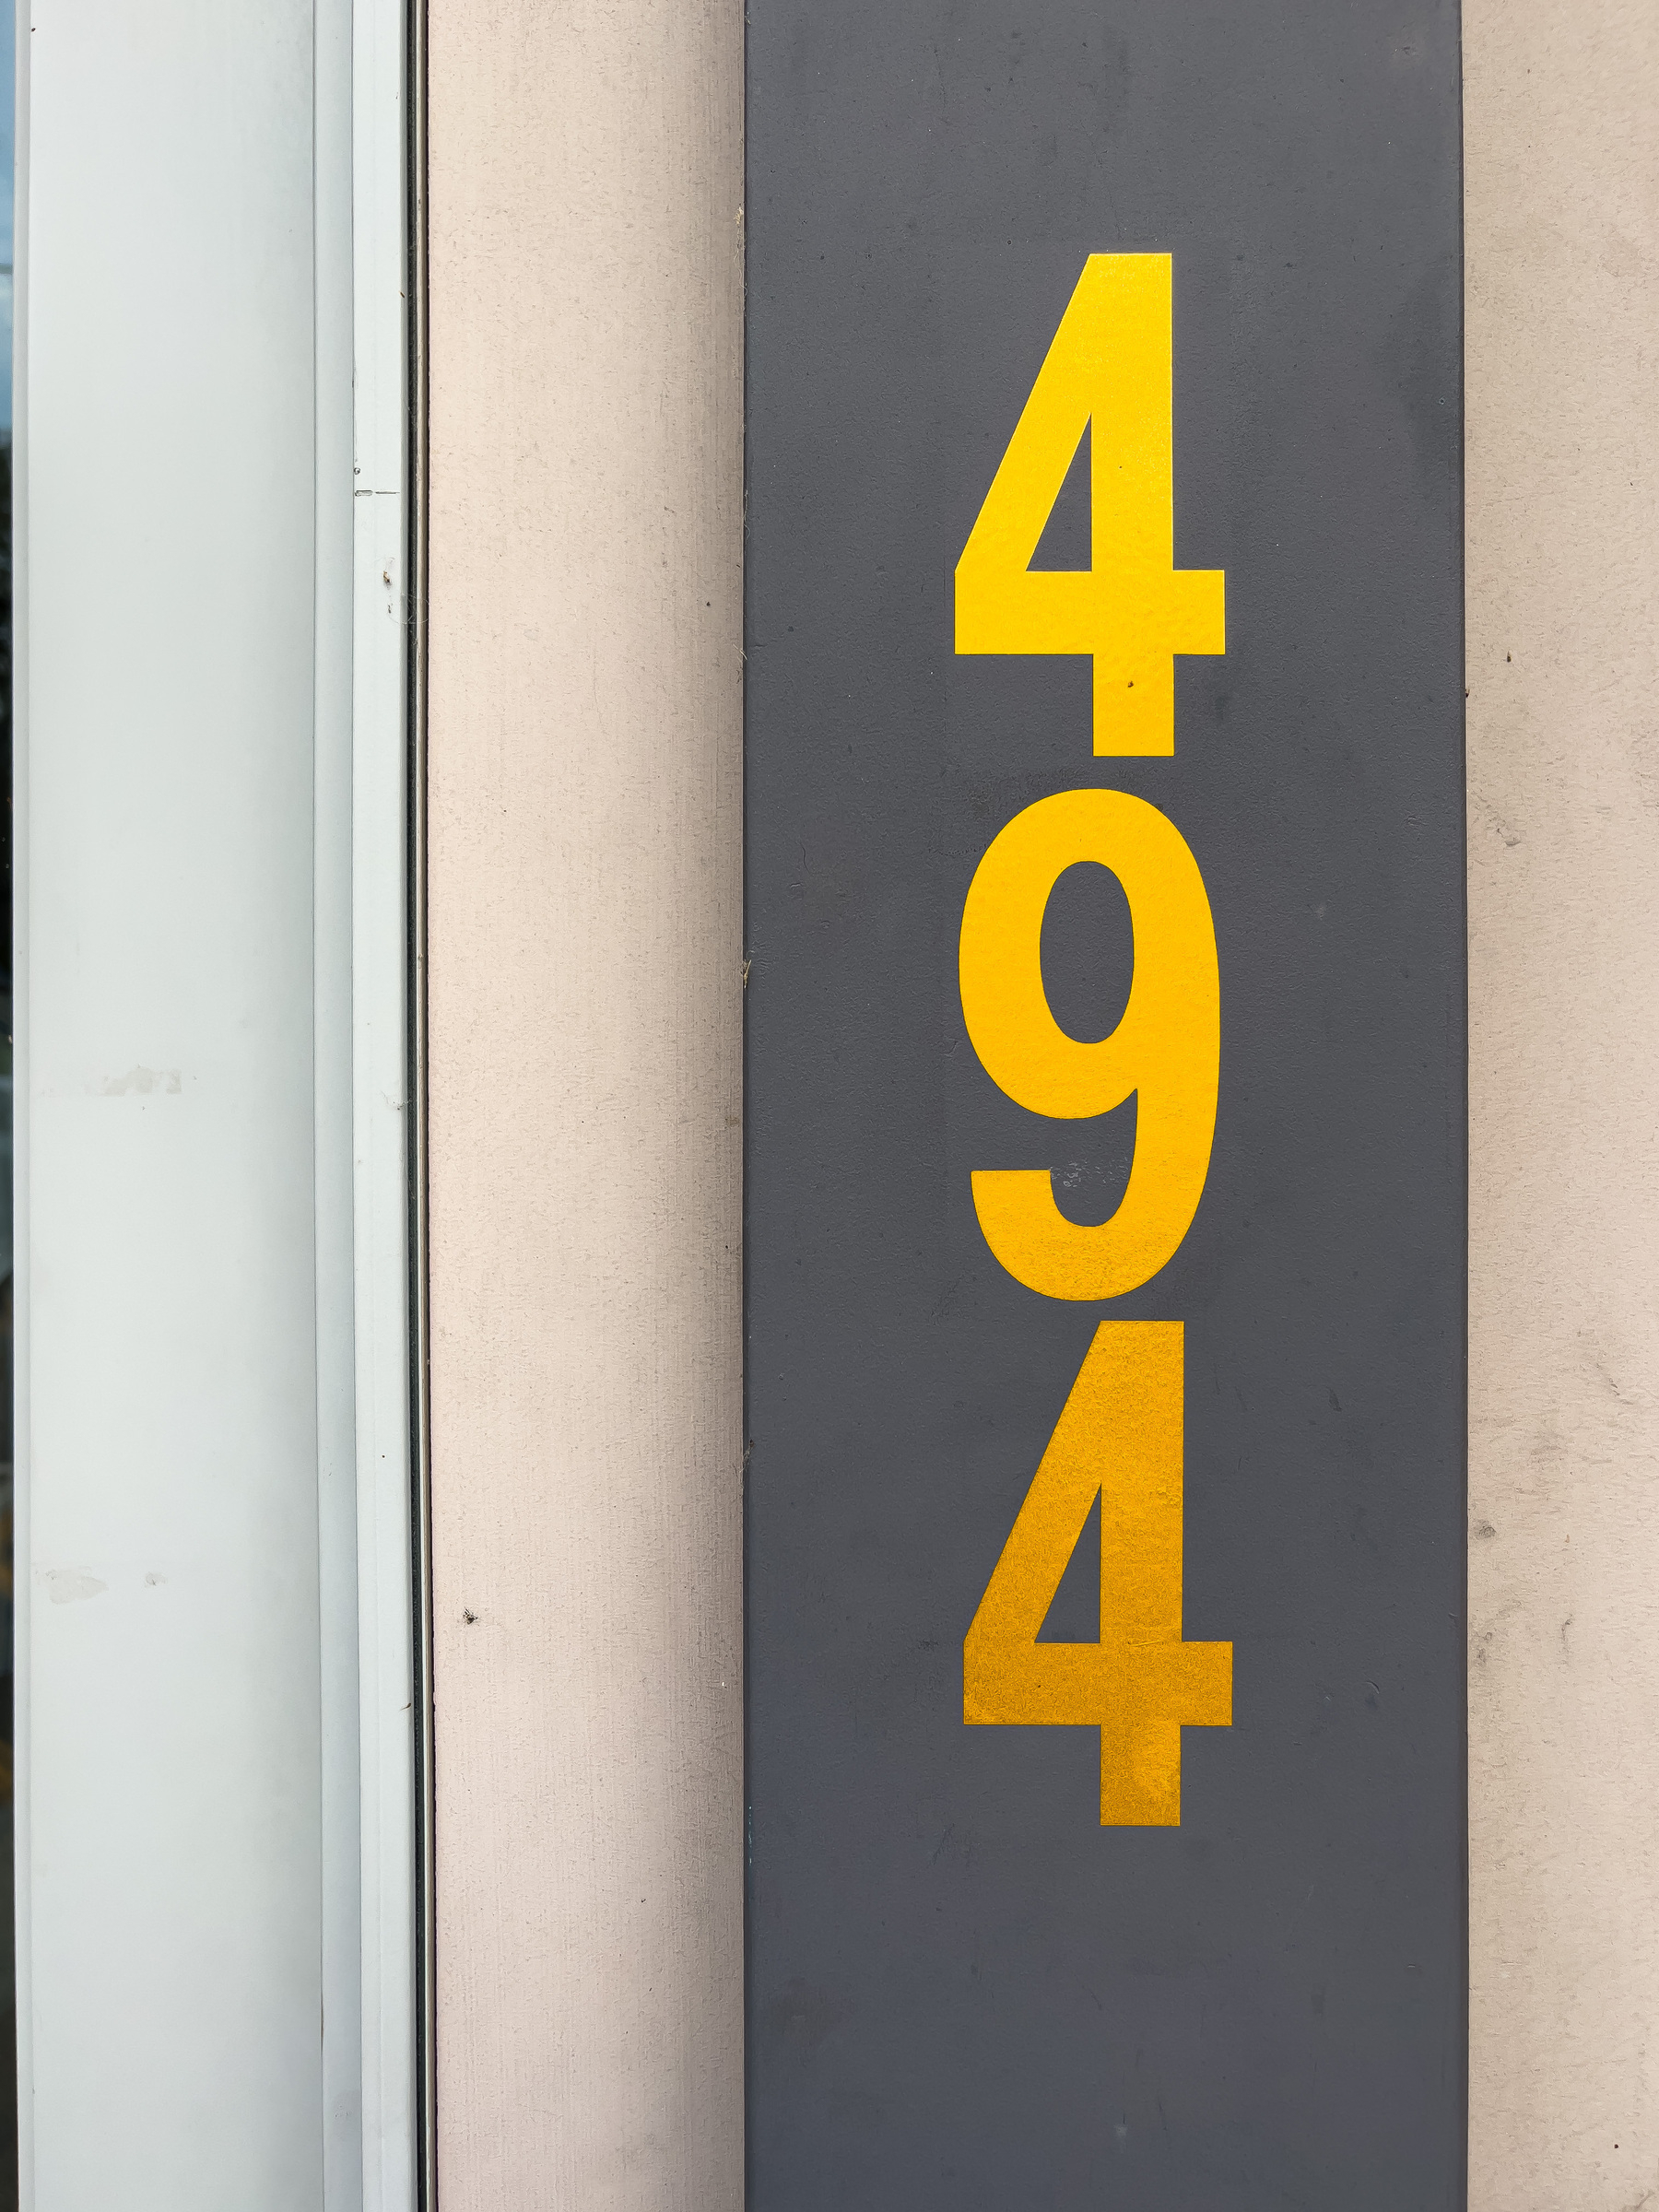 494 house number painted in yellow on door jamb painted gray.